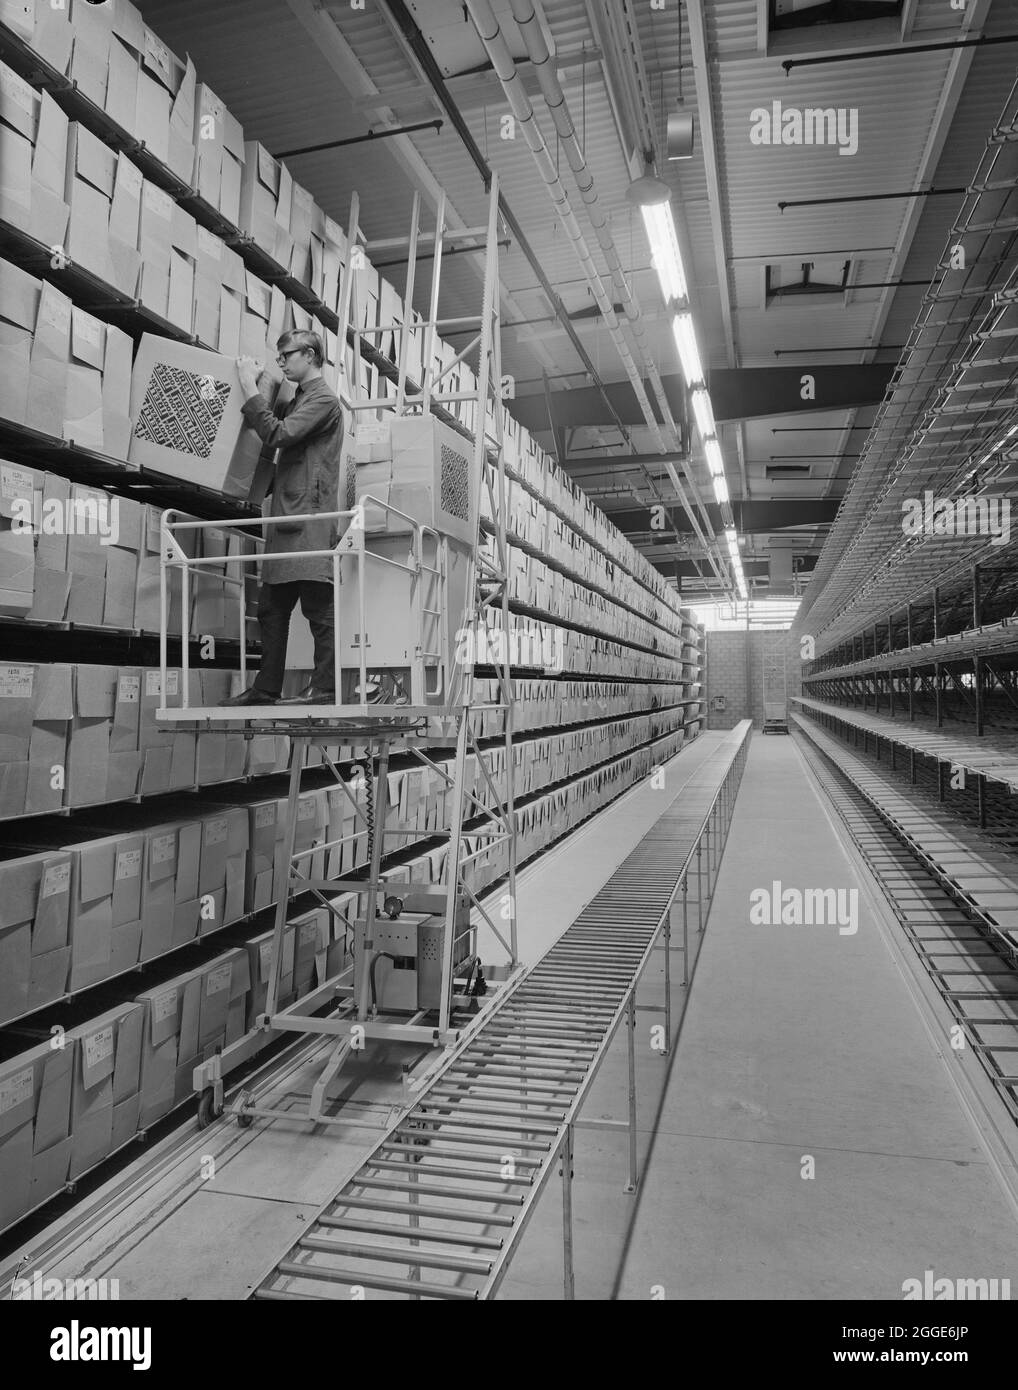 An interior view of the new Pirelli factory, showing shelving stacked with boxes and a man on a mobile platform lifting a box. The Pirelli factory in Carlisle was constructed by John Laing Construction Ltd. The factory was completed in two phases, the footwear division was first followed by the tyre division in November 1968. Stock Photo